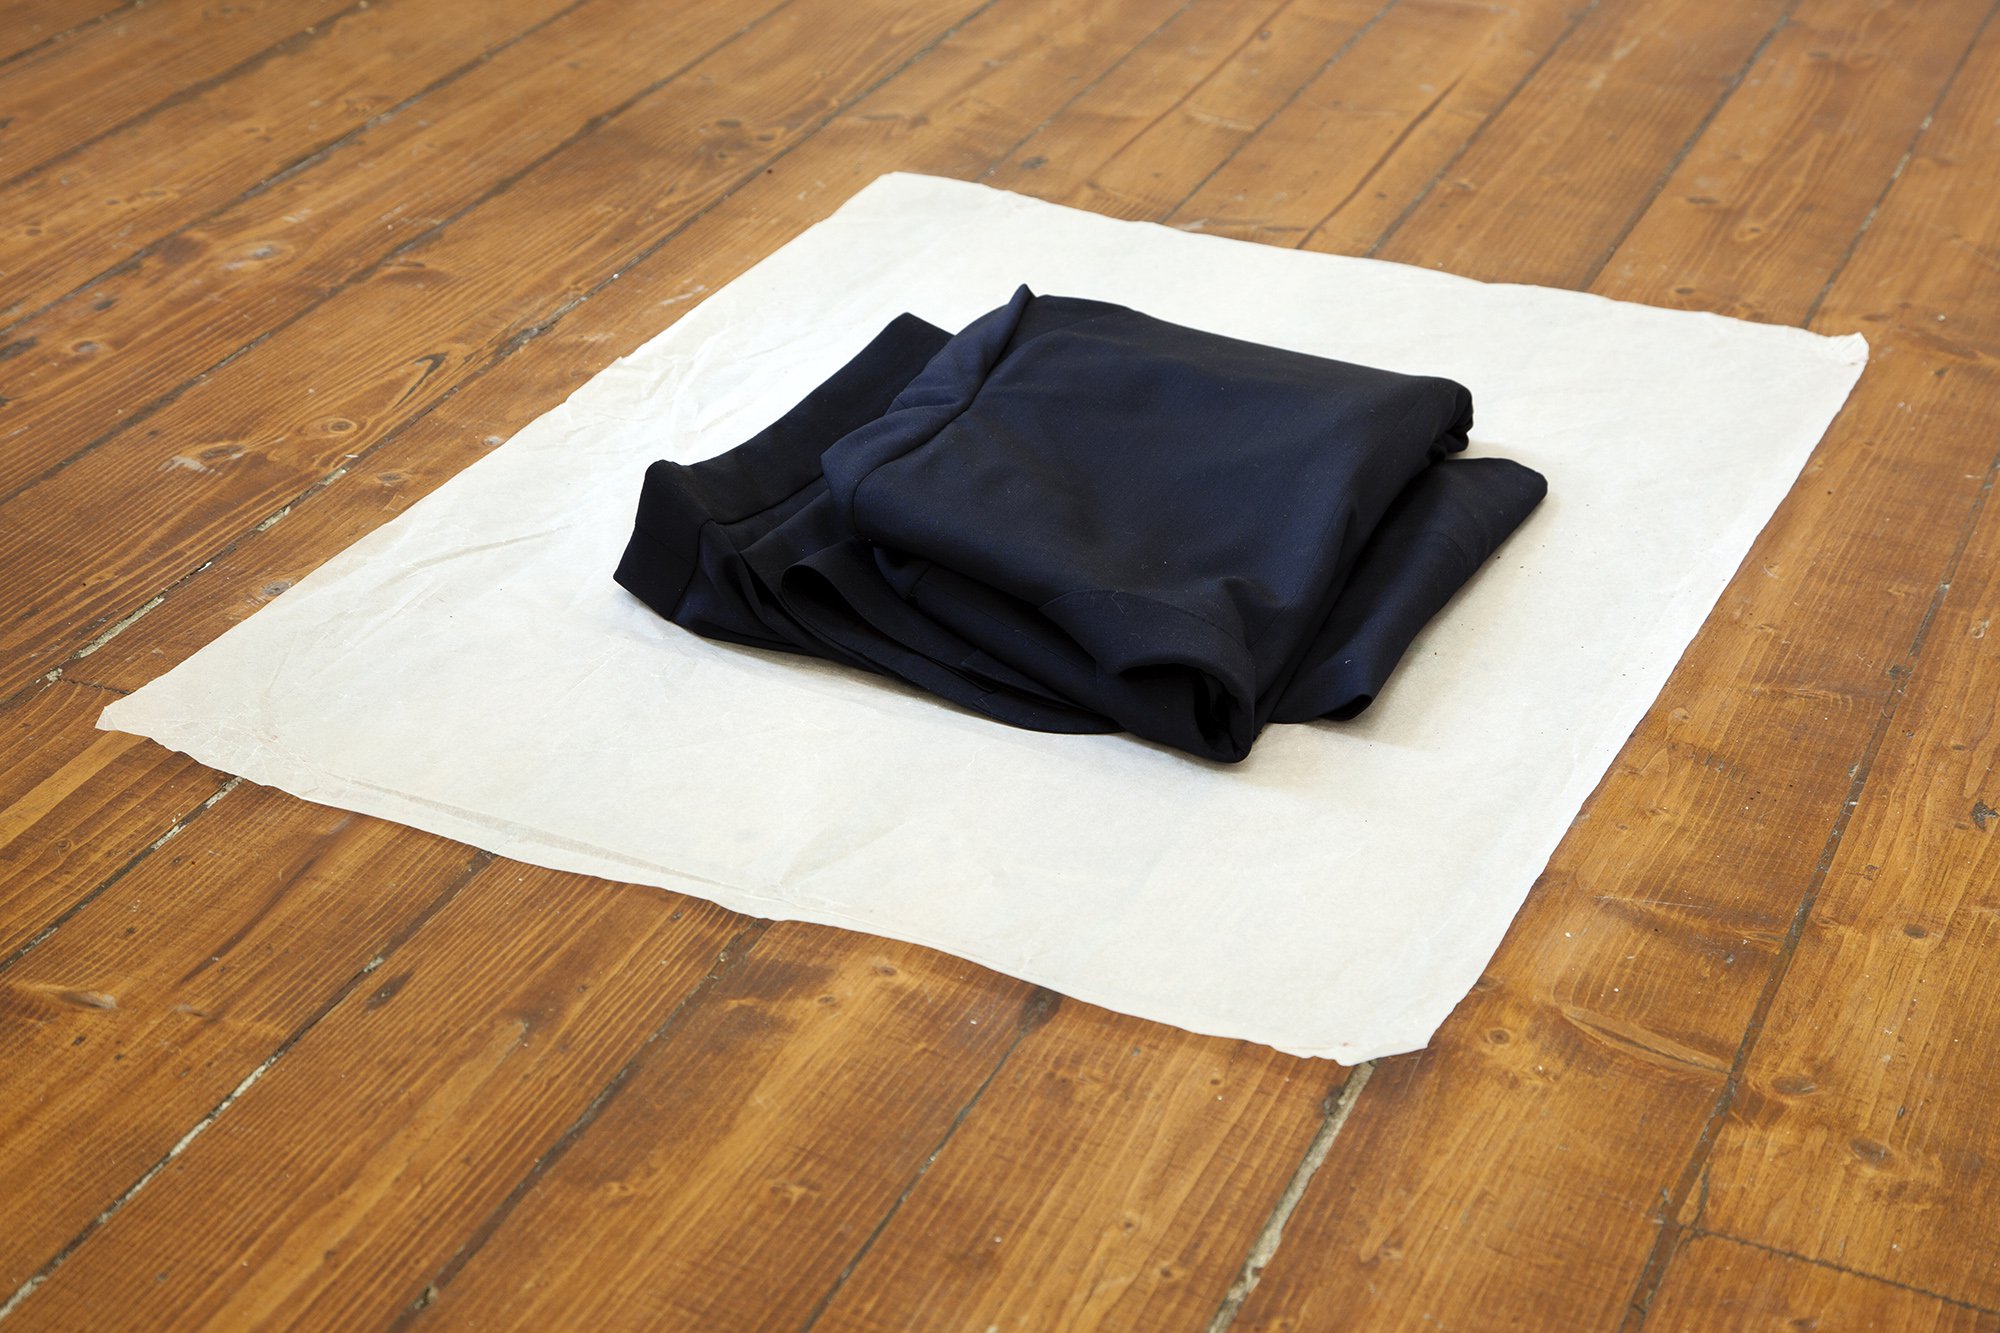 Christodoulos Panayiotou, Suit, hand made suit, Amadeus Tropical, 8 ounce (240 gram) navy, plain wave fabric in 100% wool, paper, dimensions variable, 2012